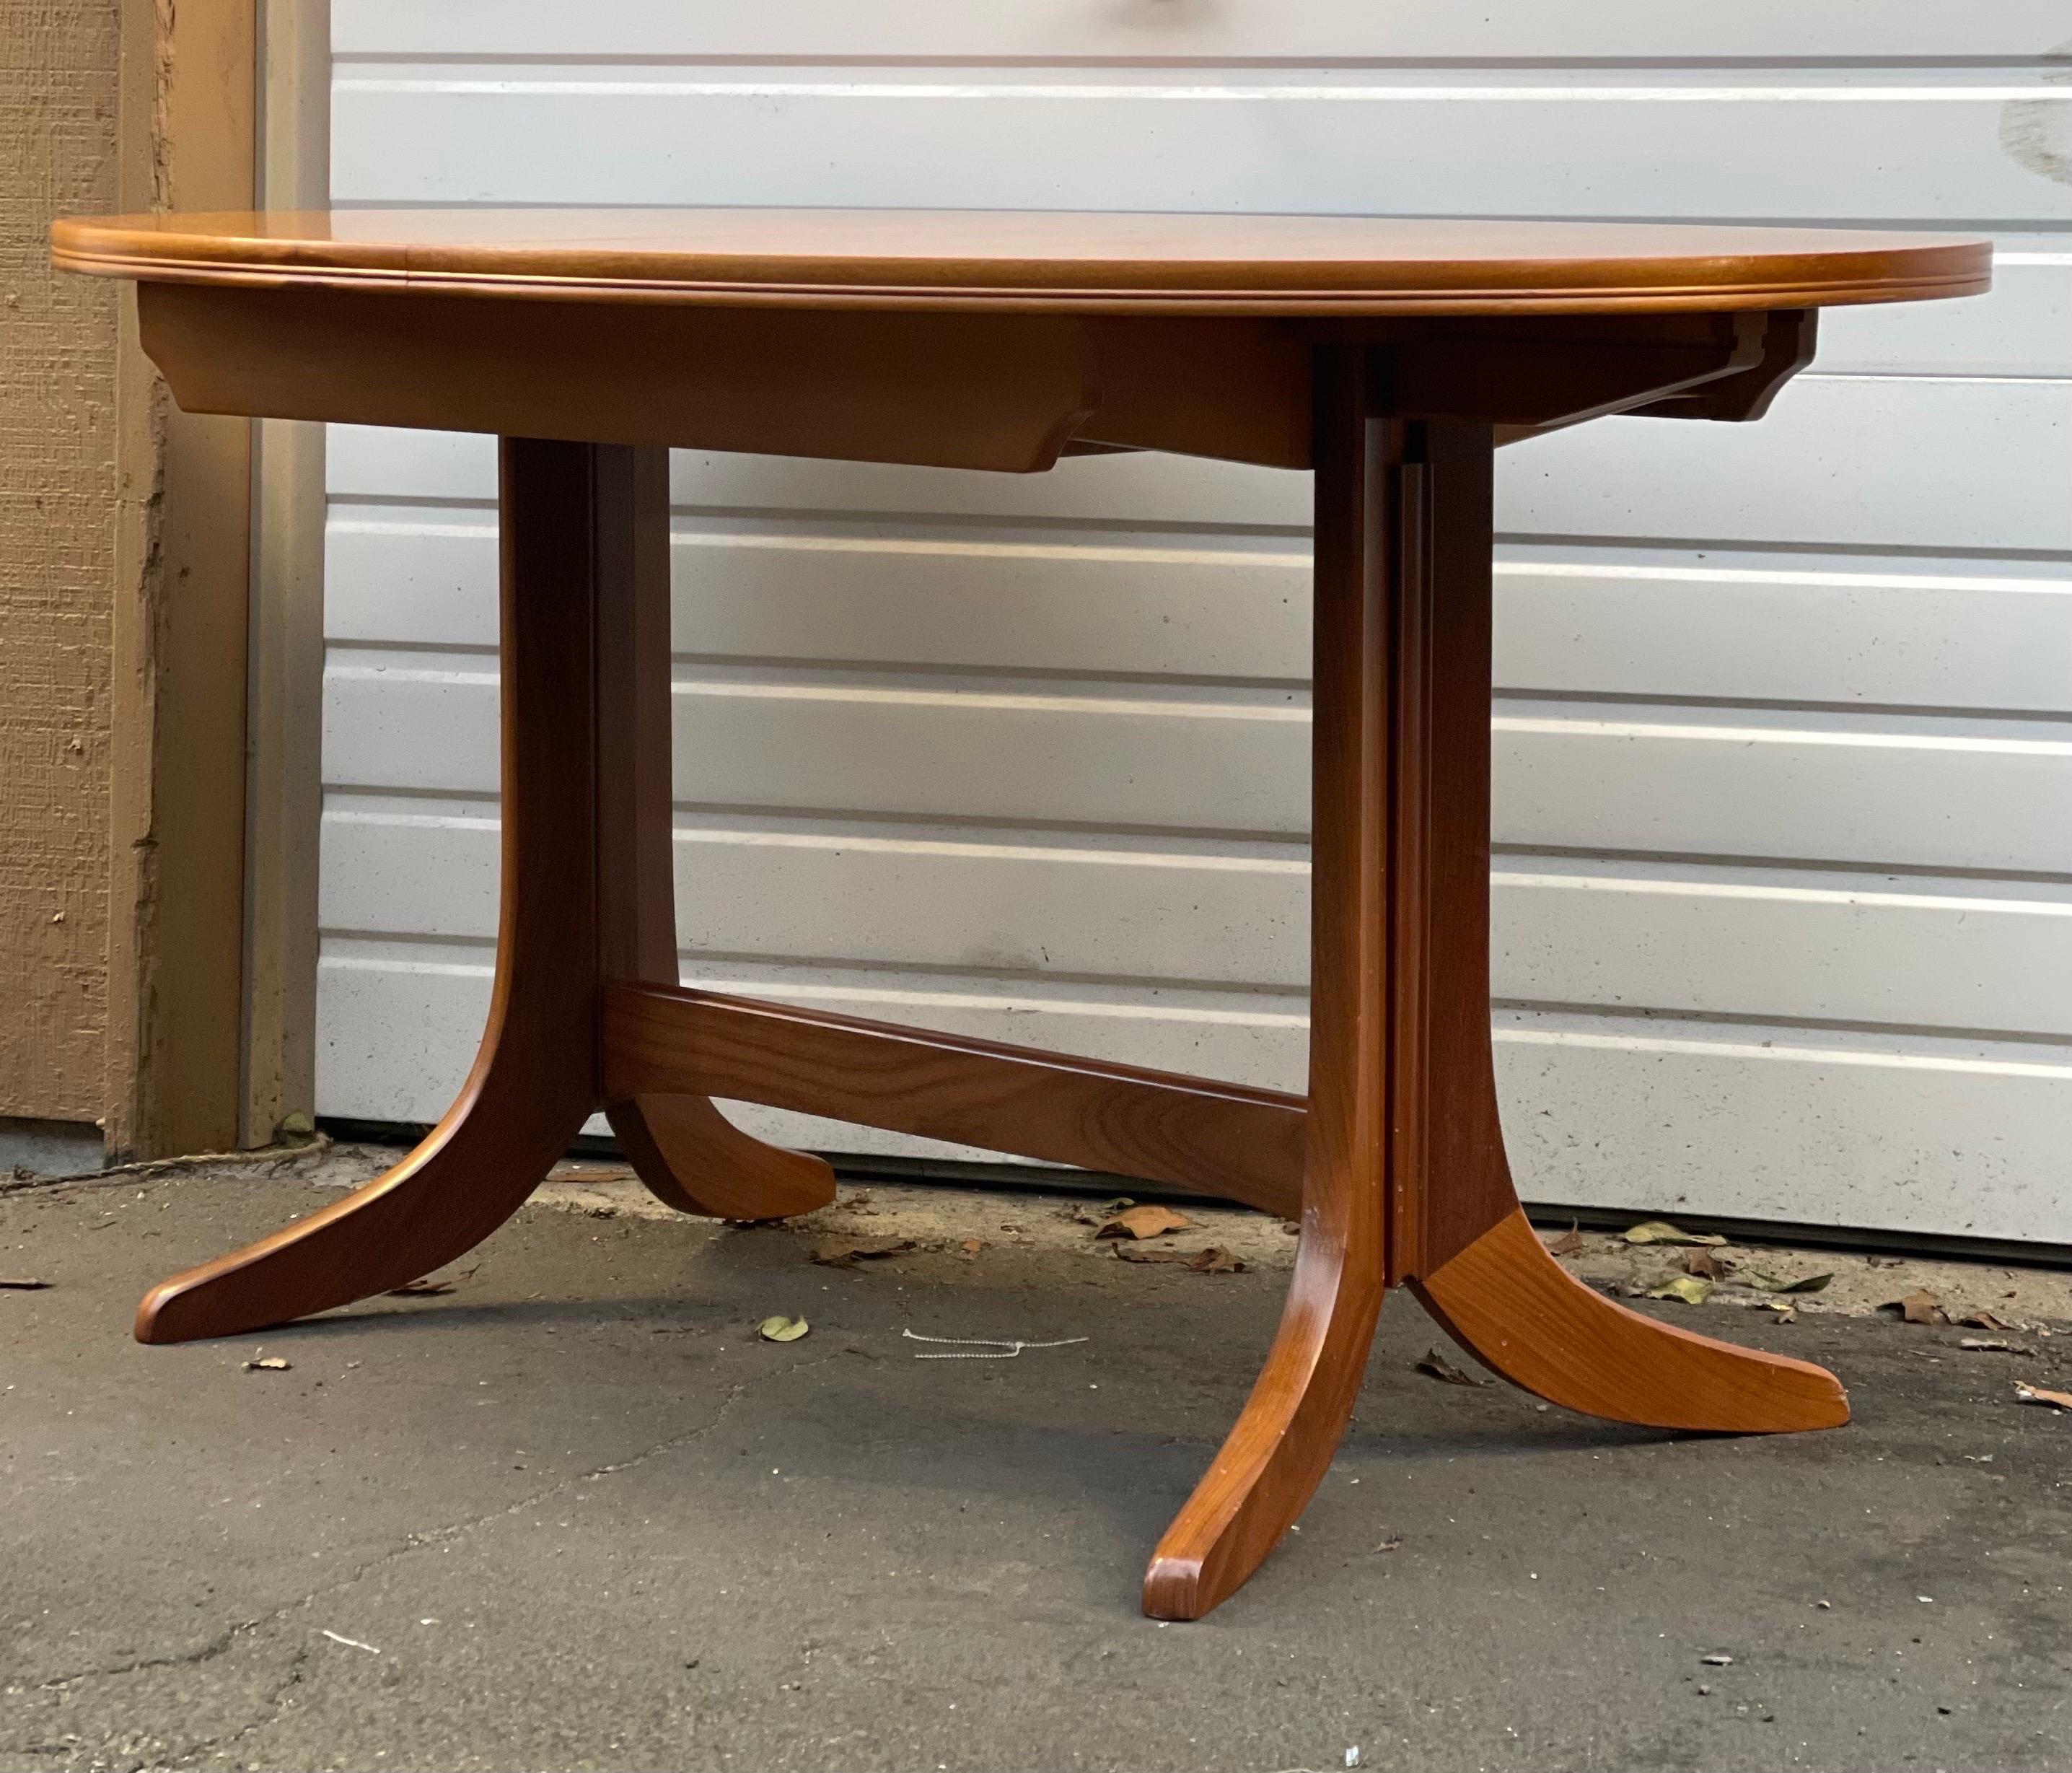 Late 20th Century Vintage Mid-Century Modern Dining Table with Butterfly Leaf, UK Import